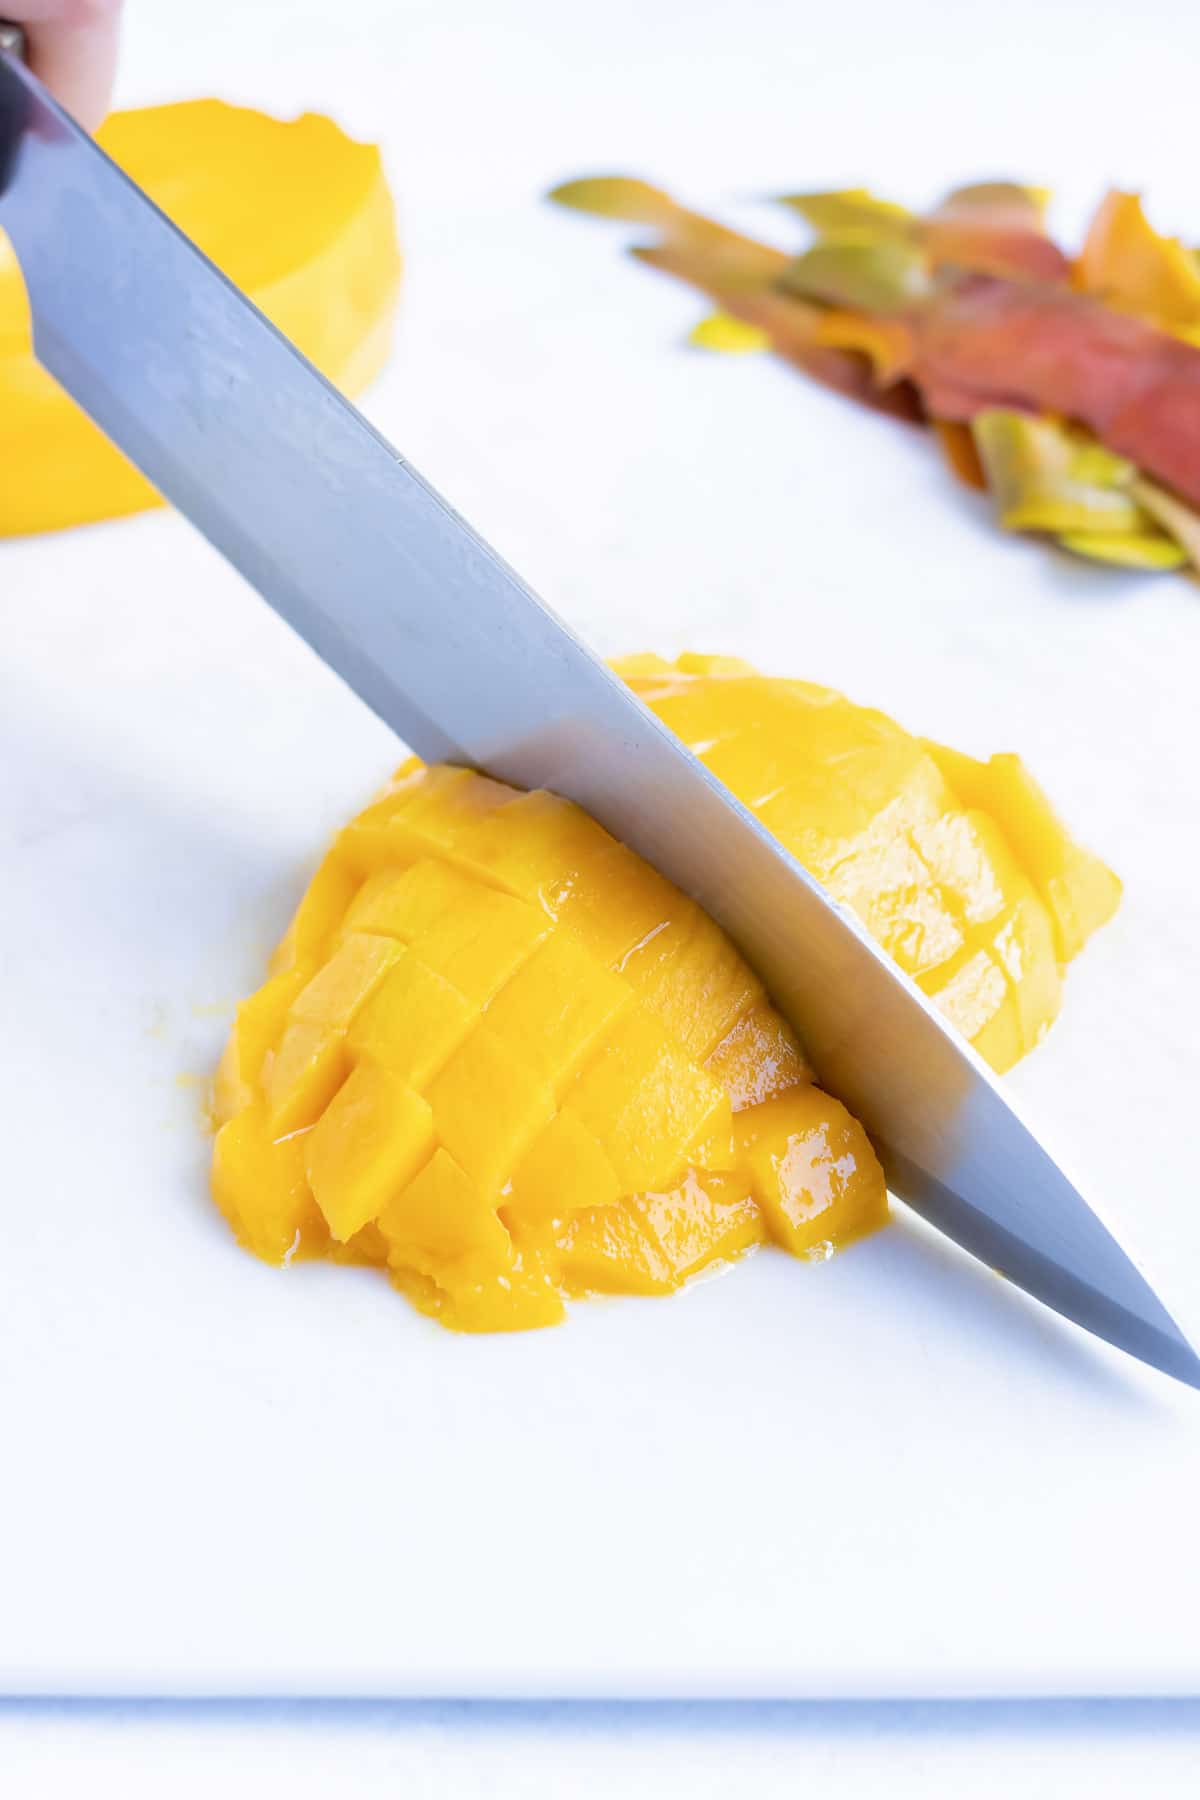 Dicing mango fruit with a knife for a salsa recipe.